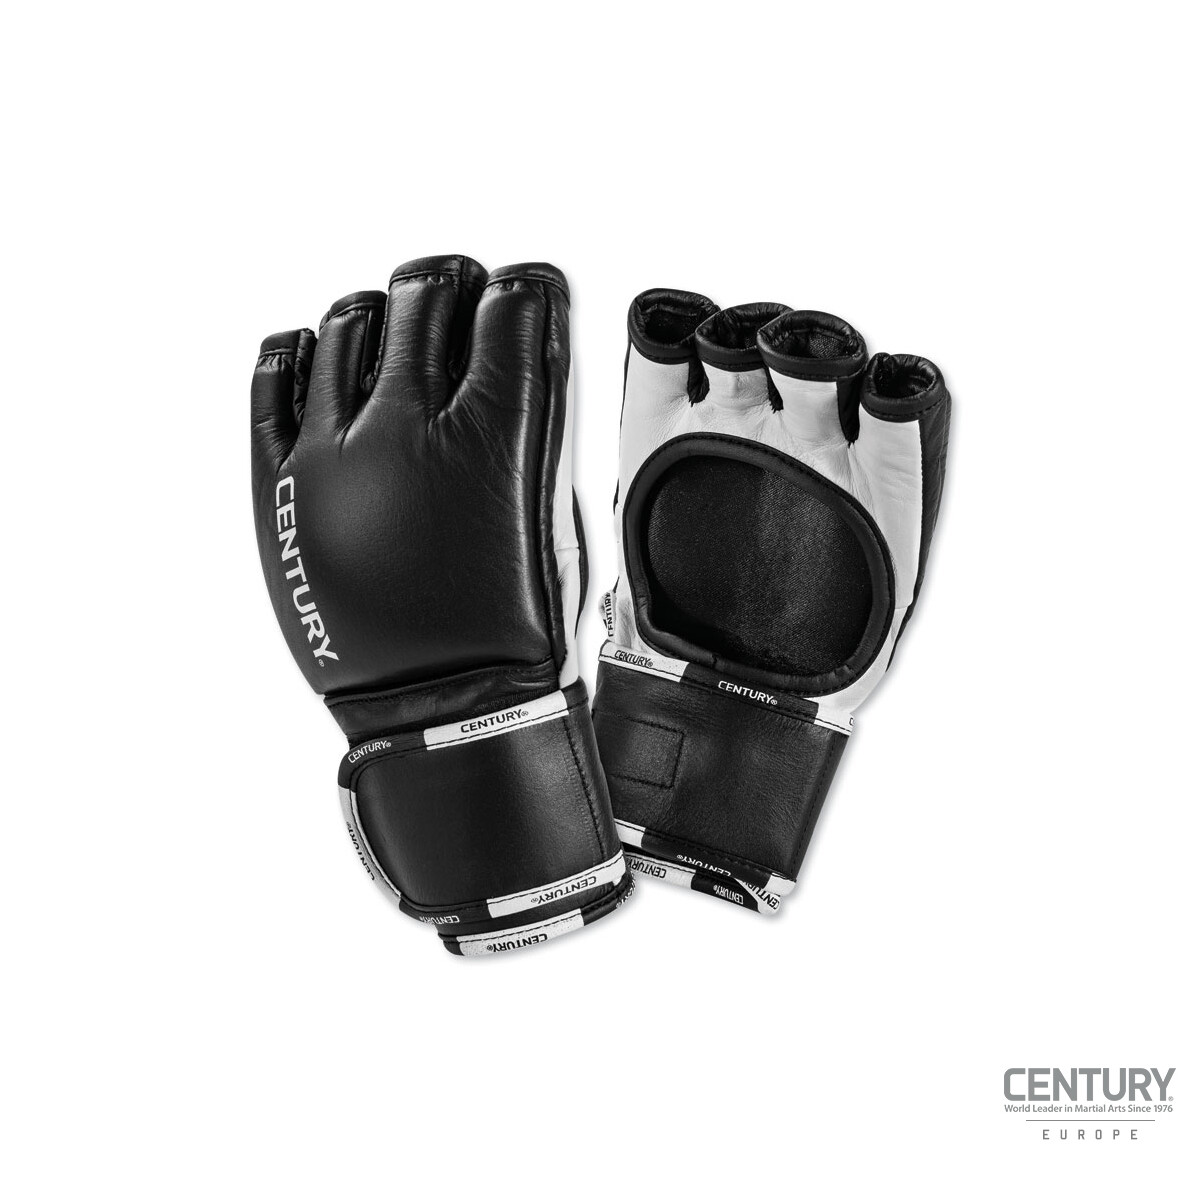 Century "Creed" MMA Competition Gloves